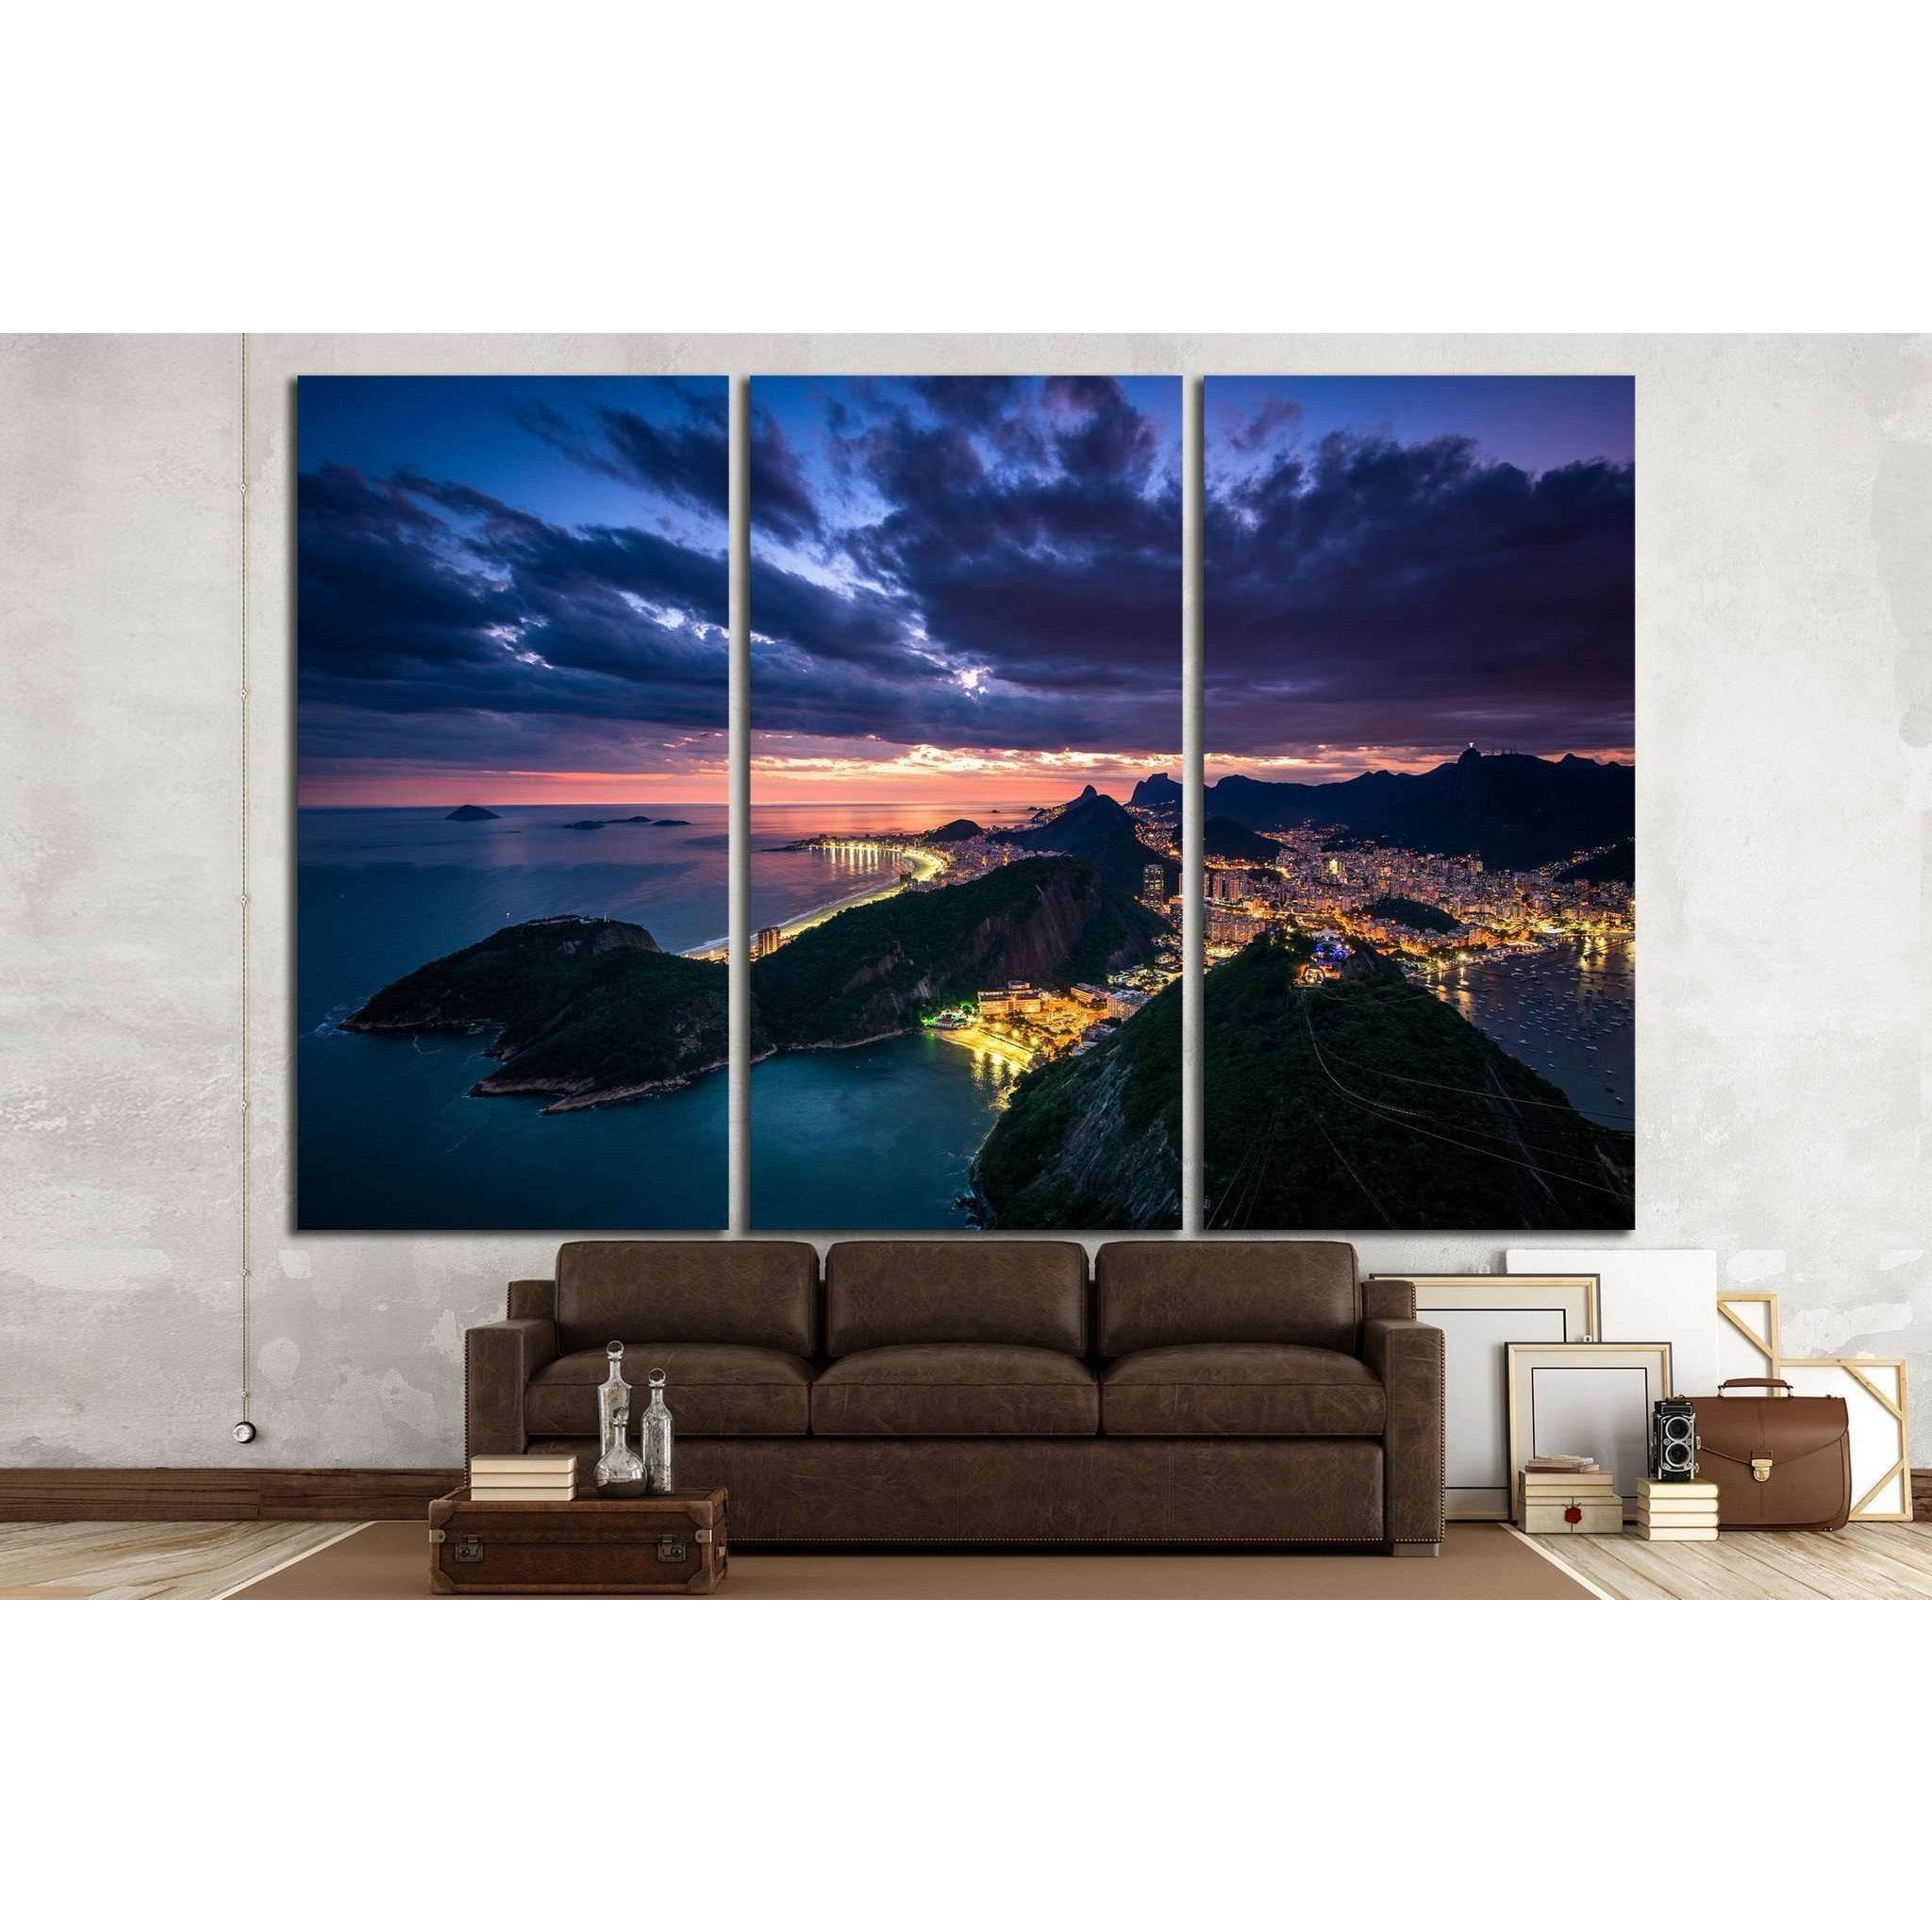 Night View of Rio de Janeiro City From the Sugarloaf Mountain №1318 Ready to Hang Canvas Print